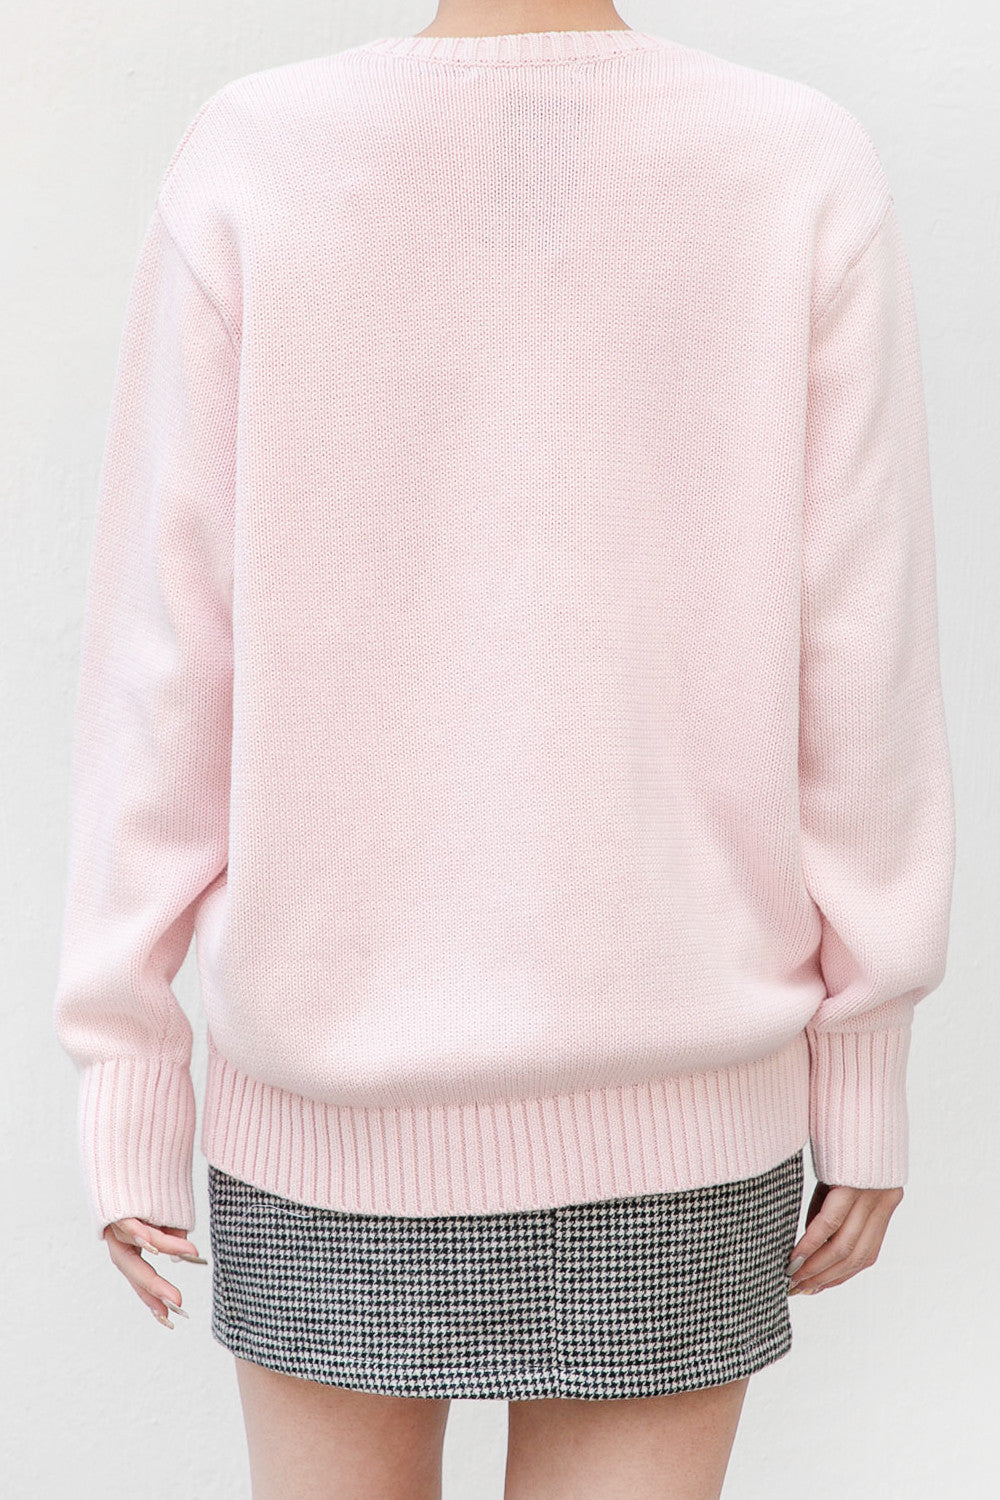 Pink Heather / Oversized Fit